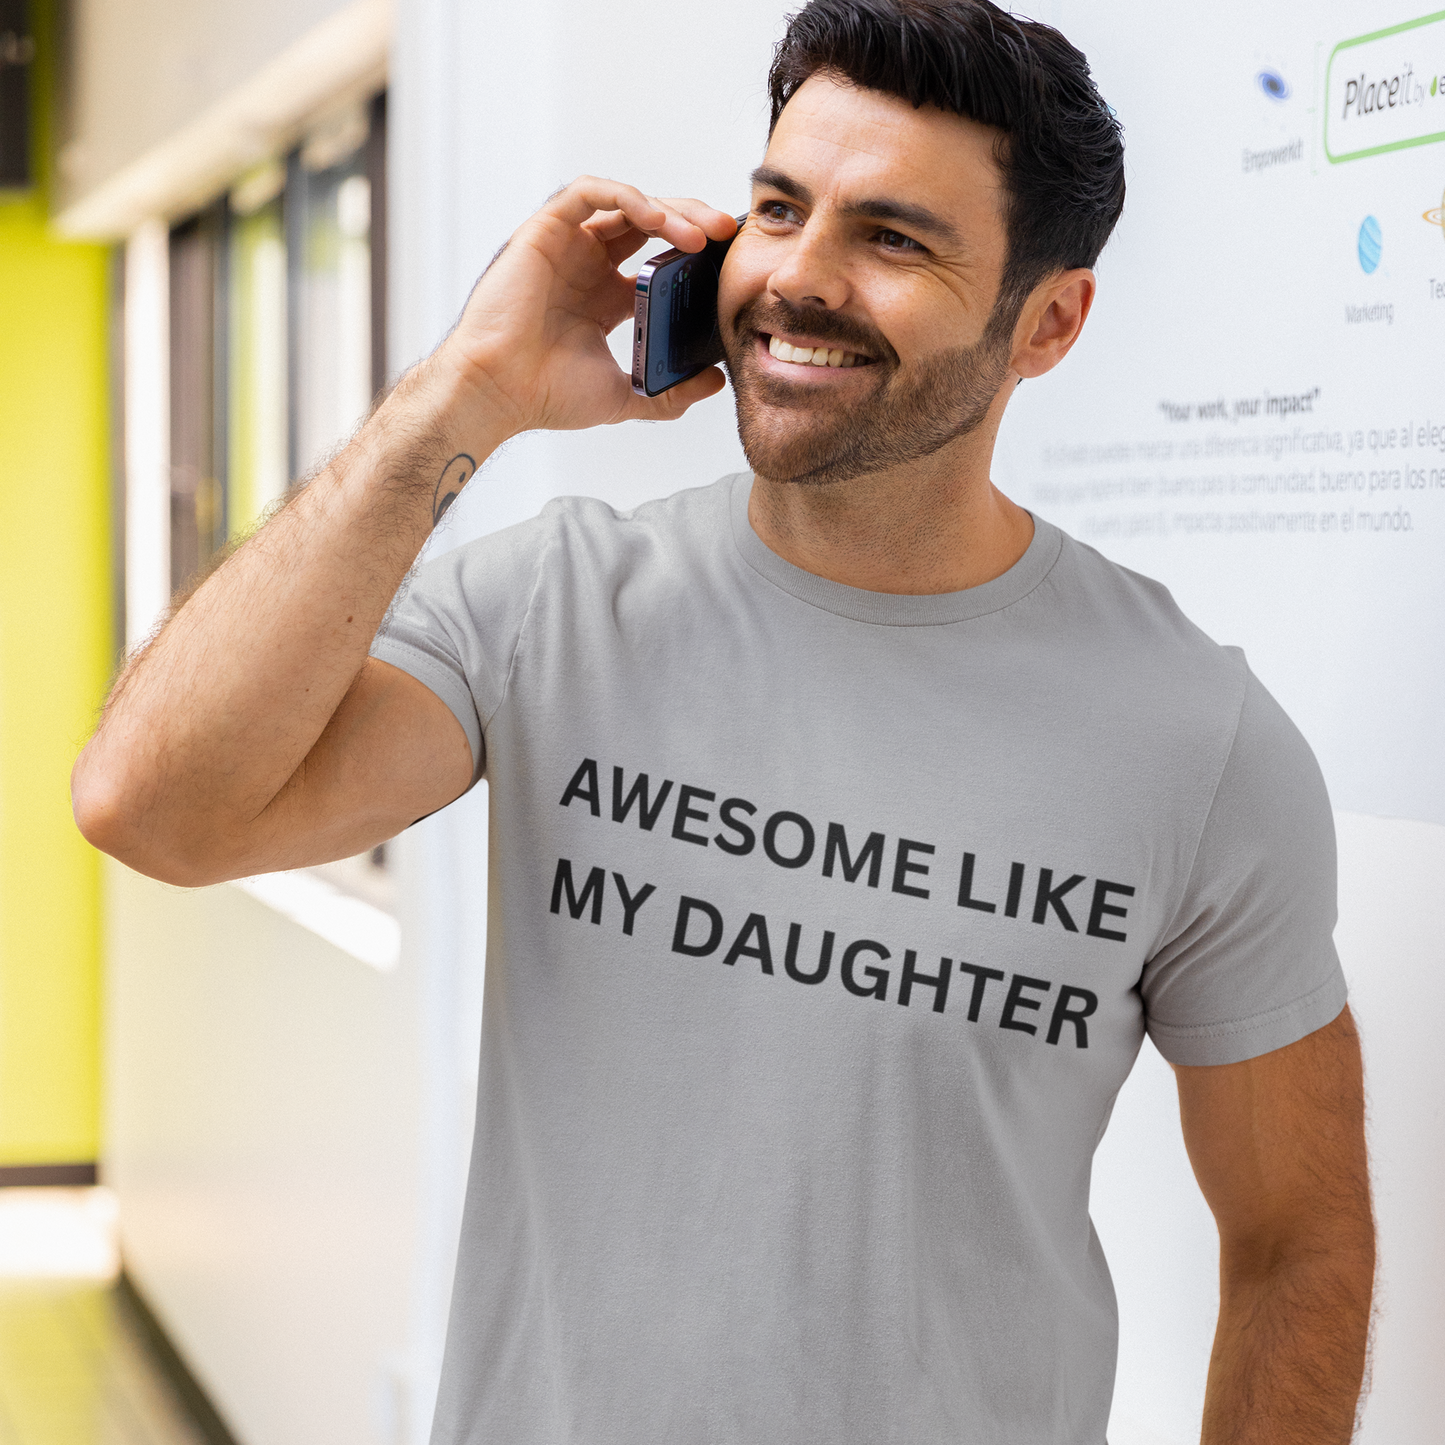 Get trendy with Awesome Like My Daughter T-Shirt - T-Shirts available at Good Gift Company. Grab yours for $15.99 today!